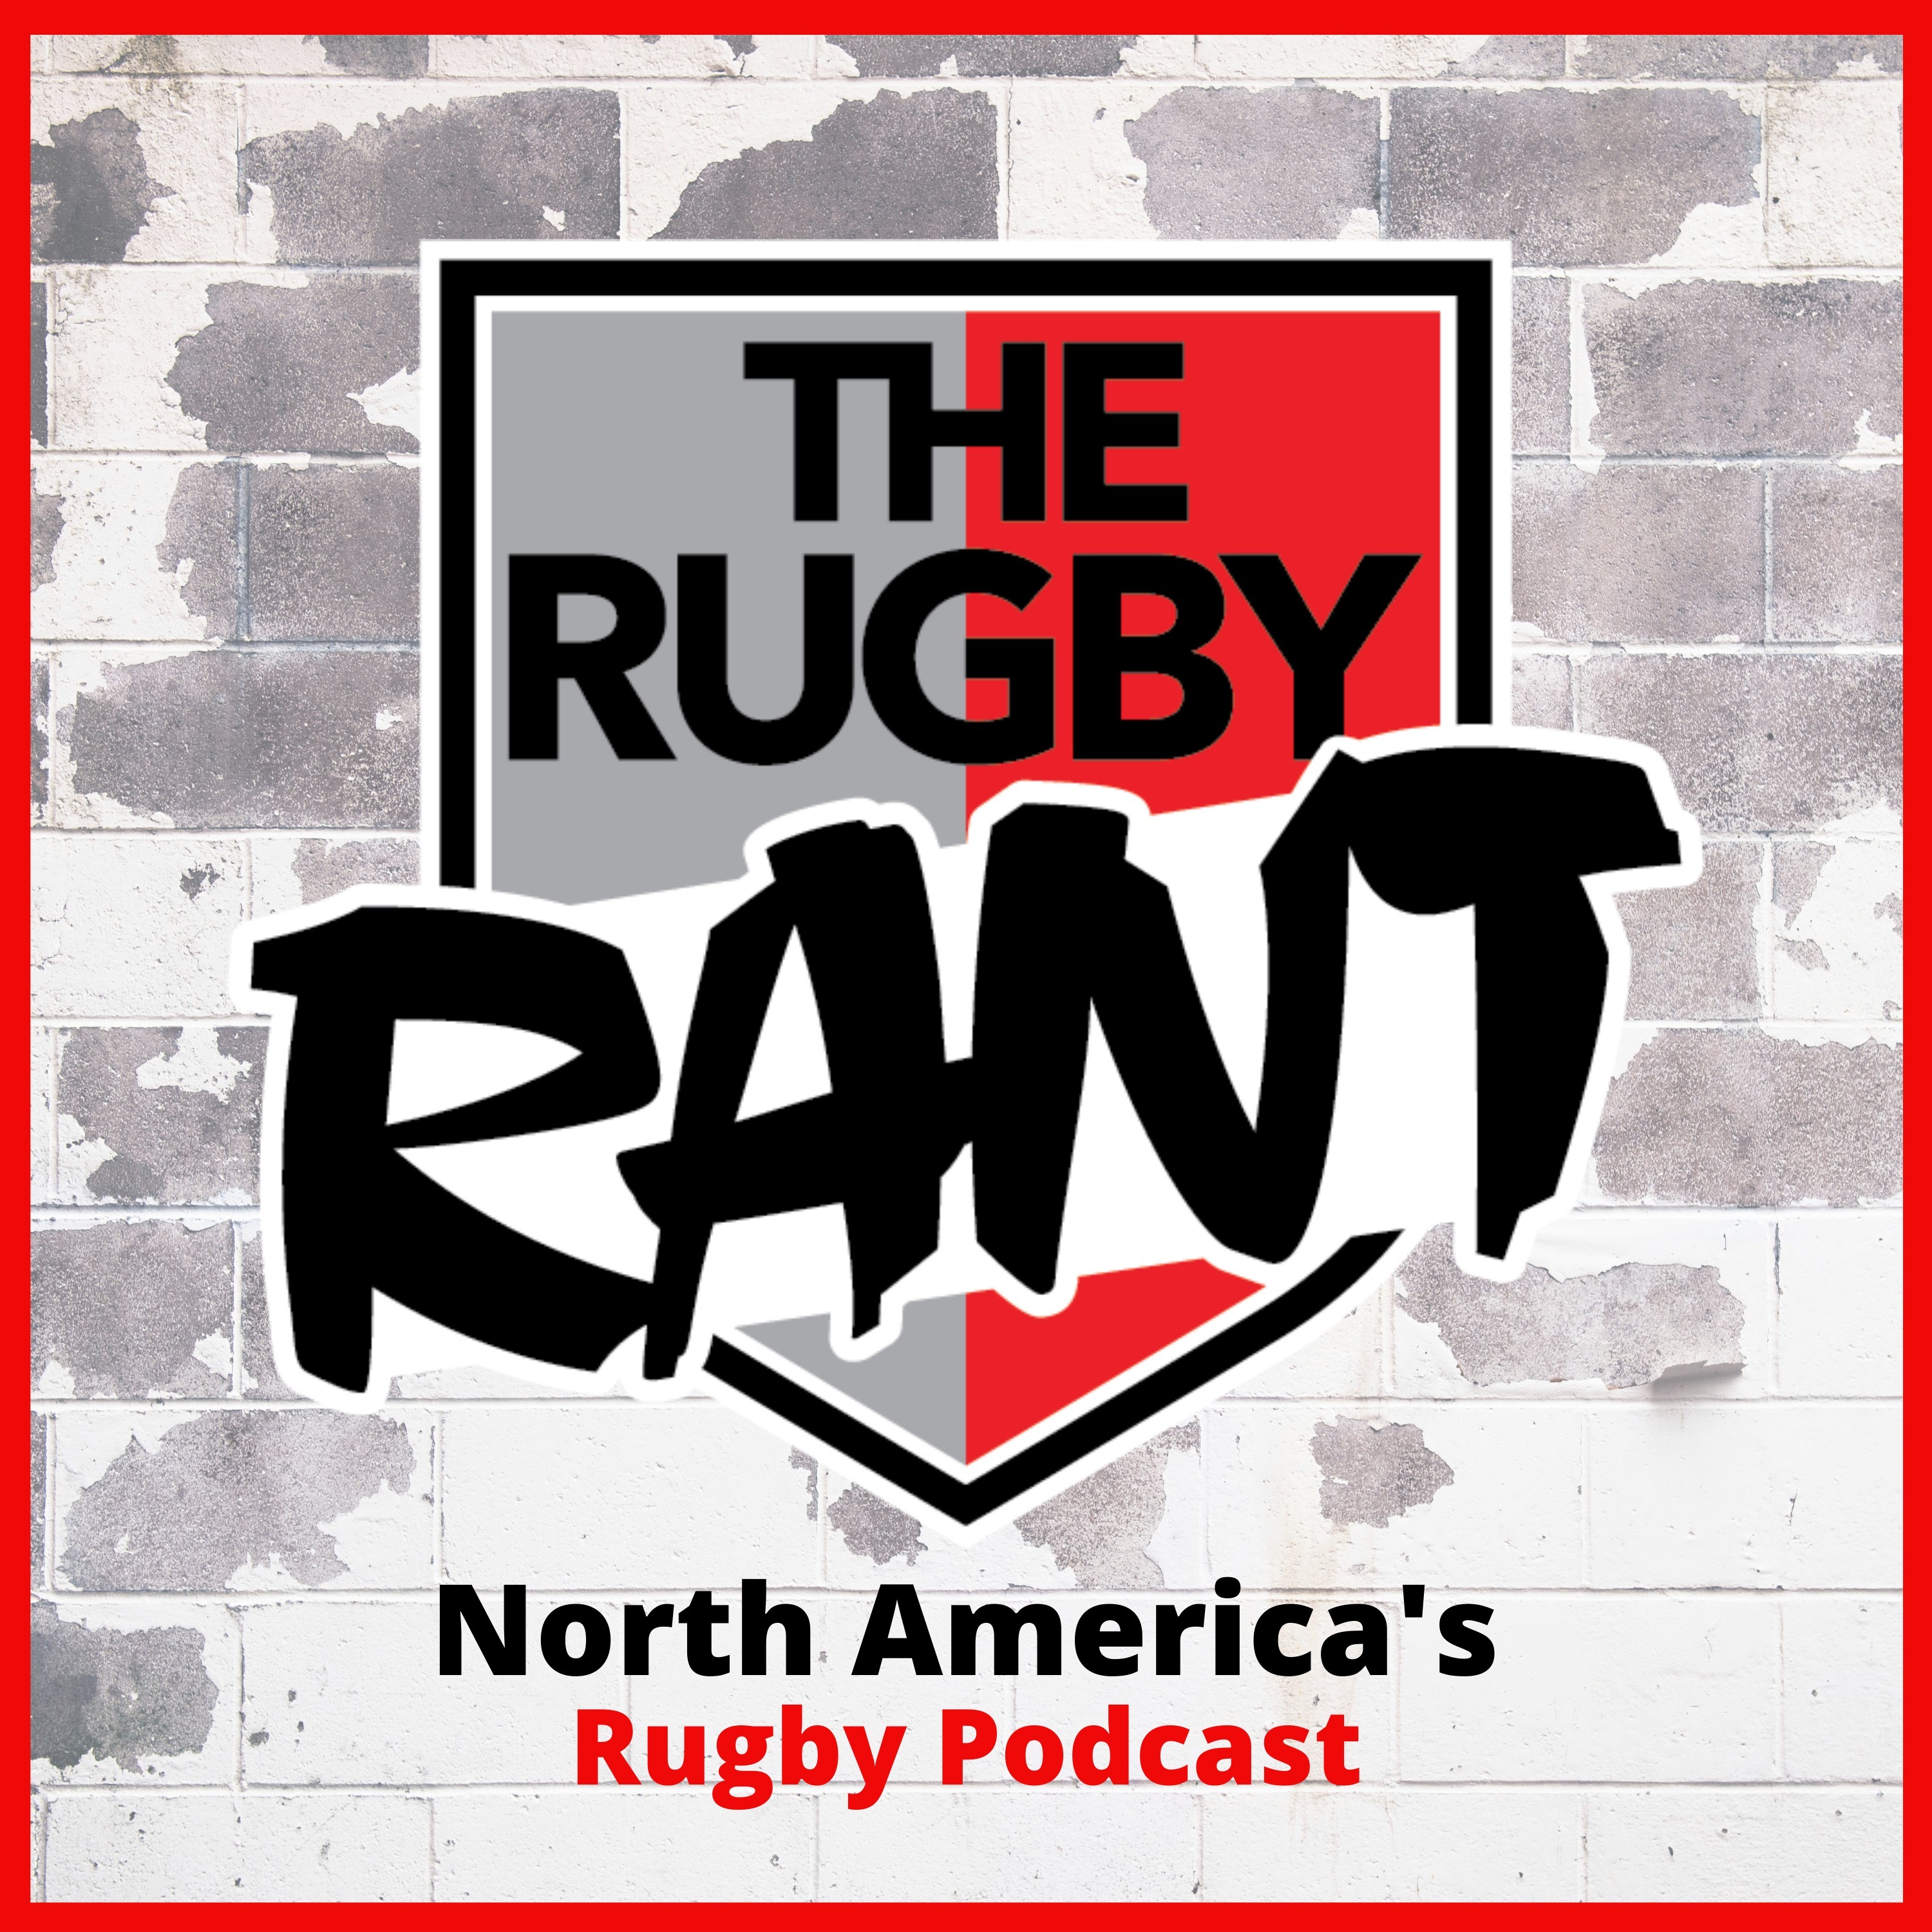 The Rugby Rant - Run, Pass or Kick with John Ryberg